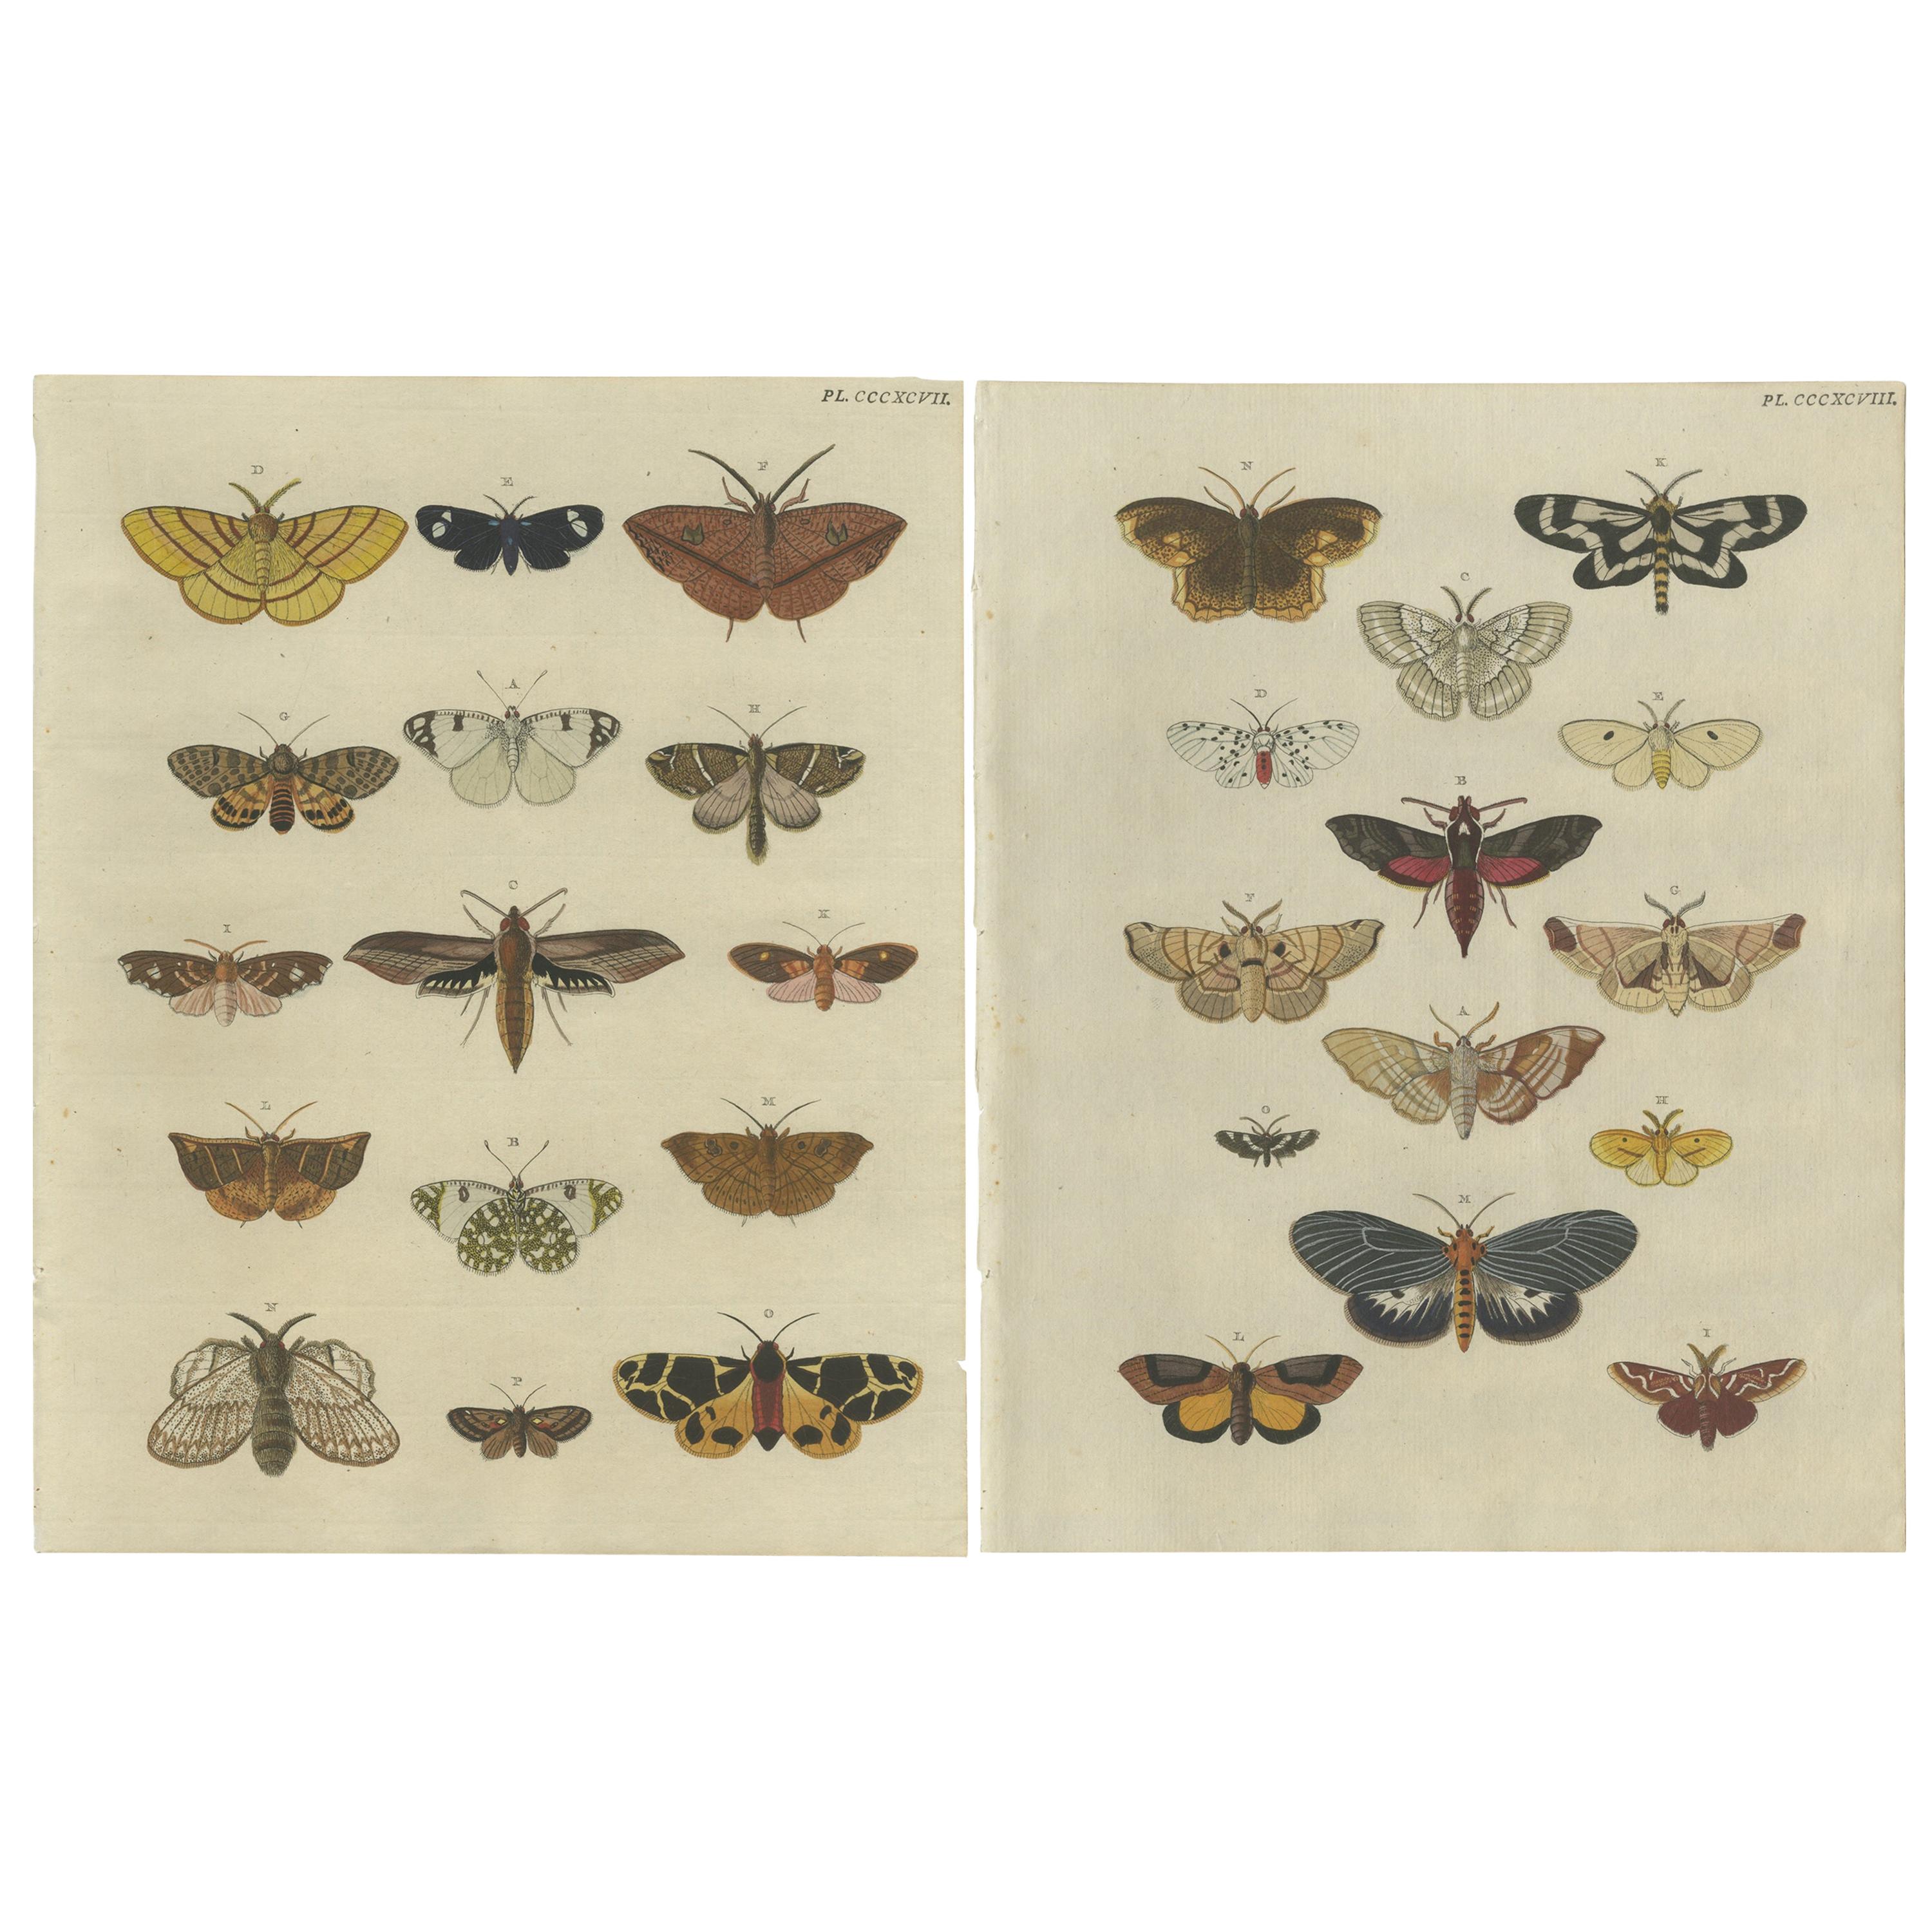 Set of 2 Antique Butterfly Prints 'pl. 397' by Cramer, 1779